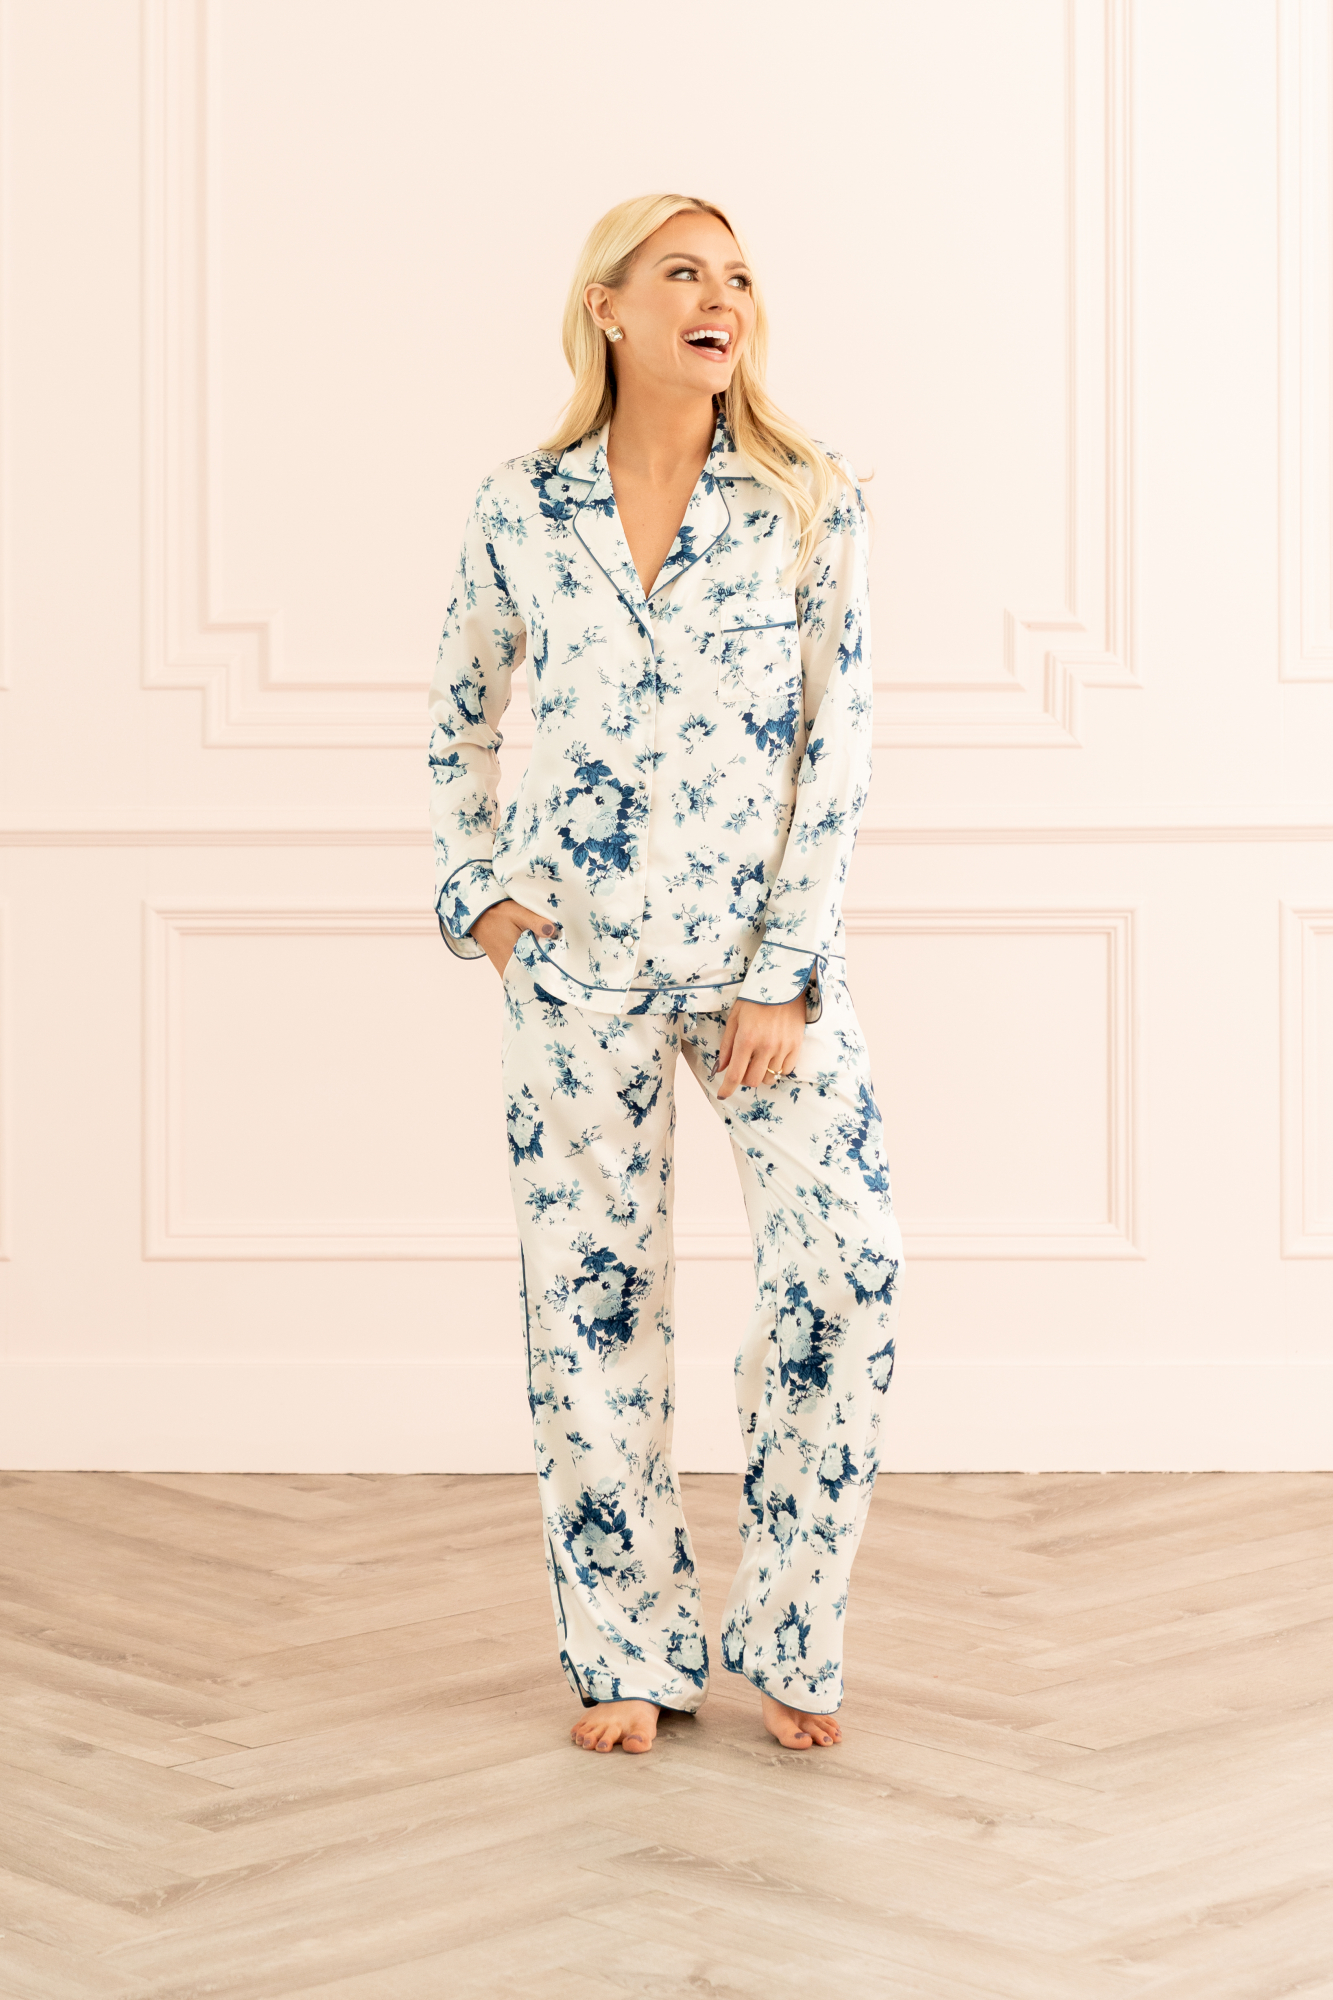 The Rachel Parcell Winter Collection is Here... - Rach Parcell